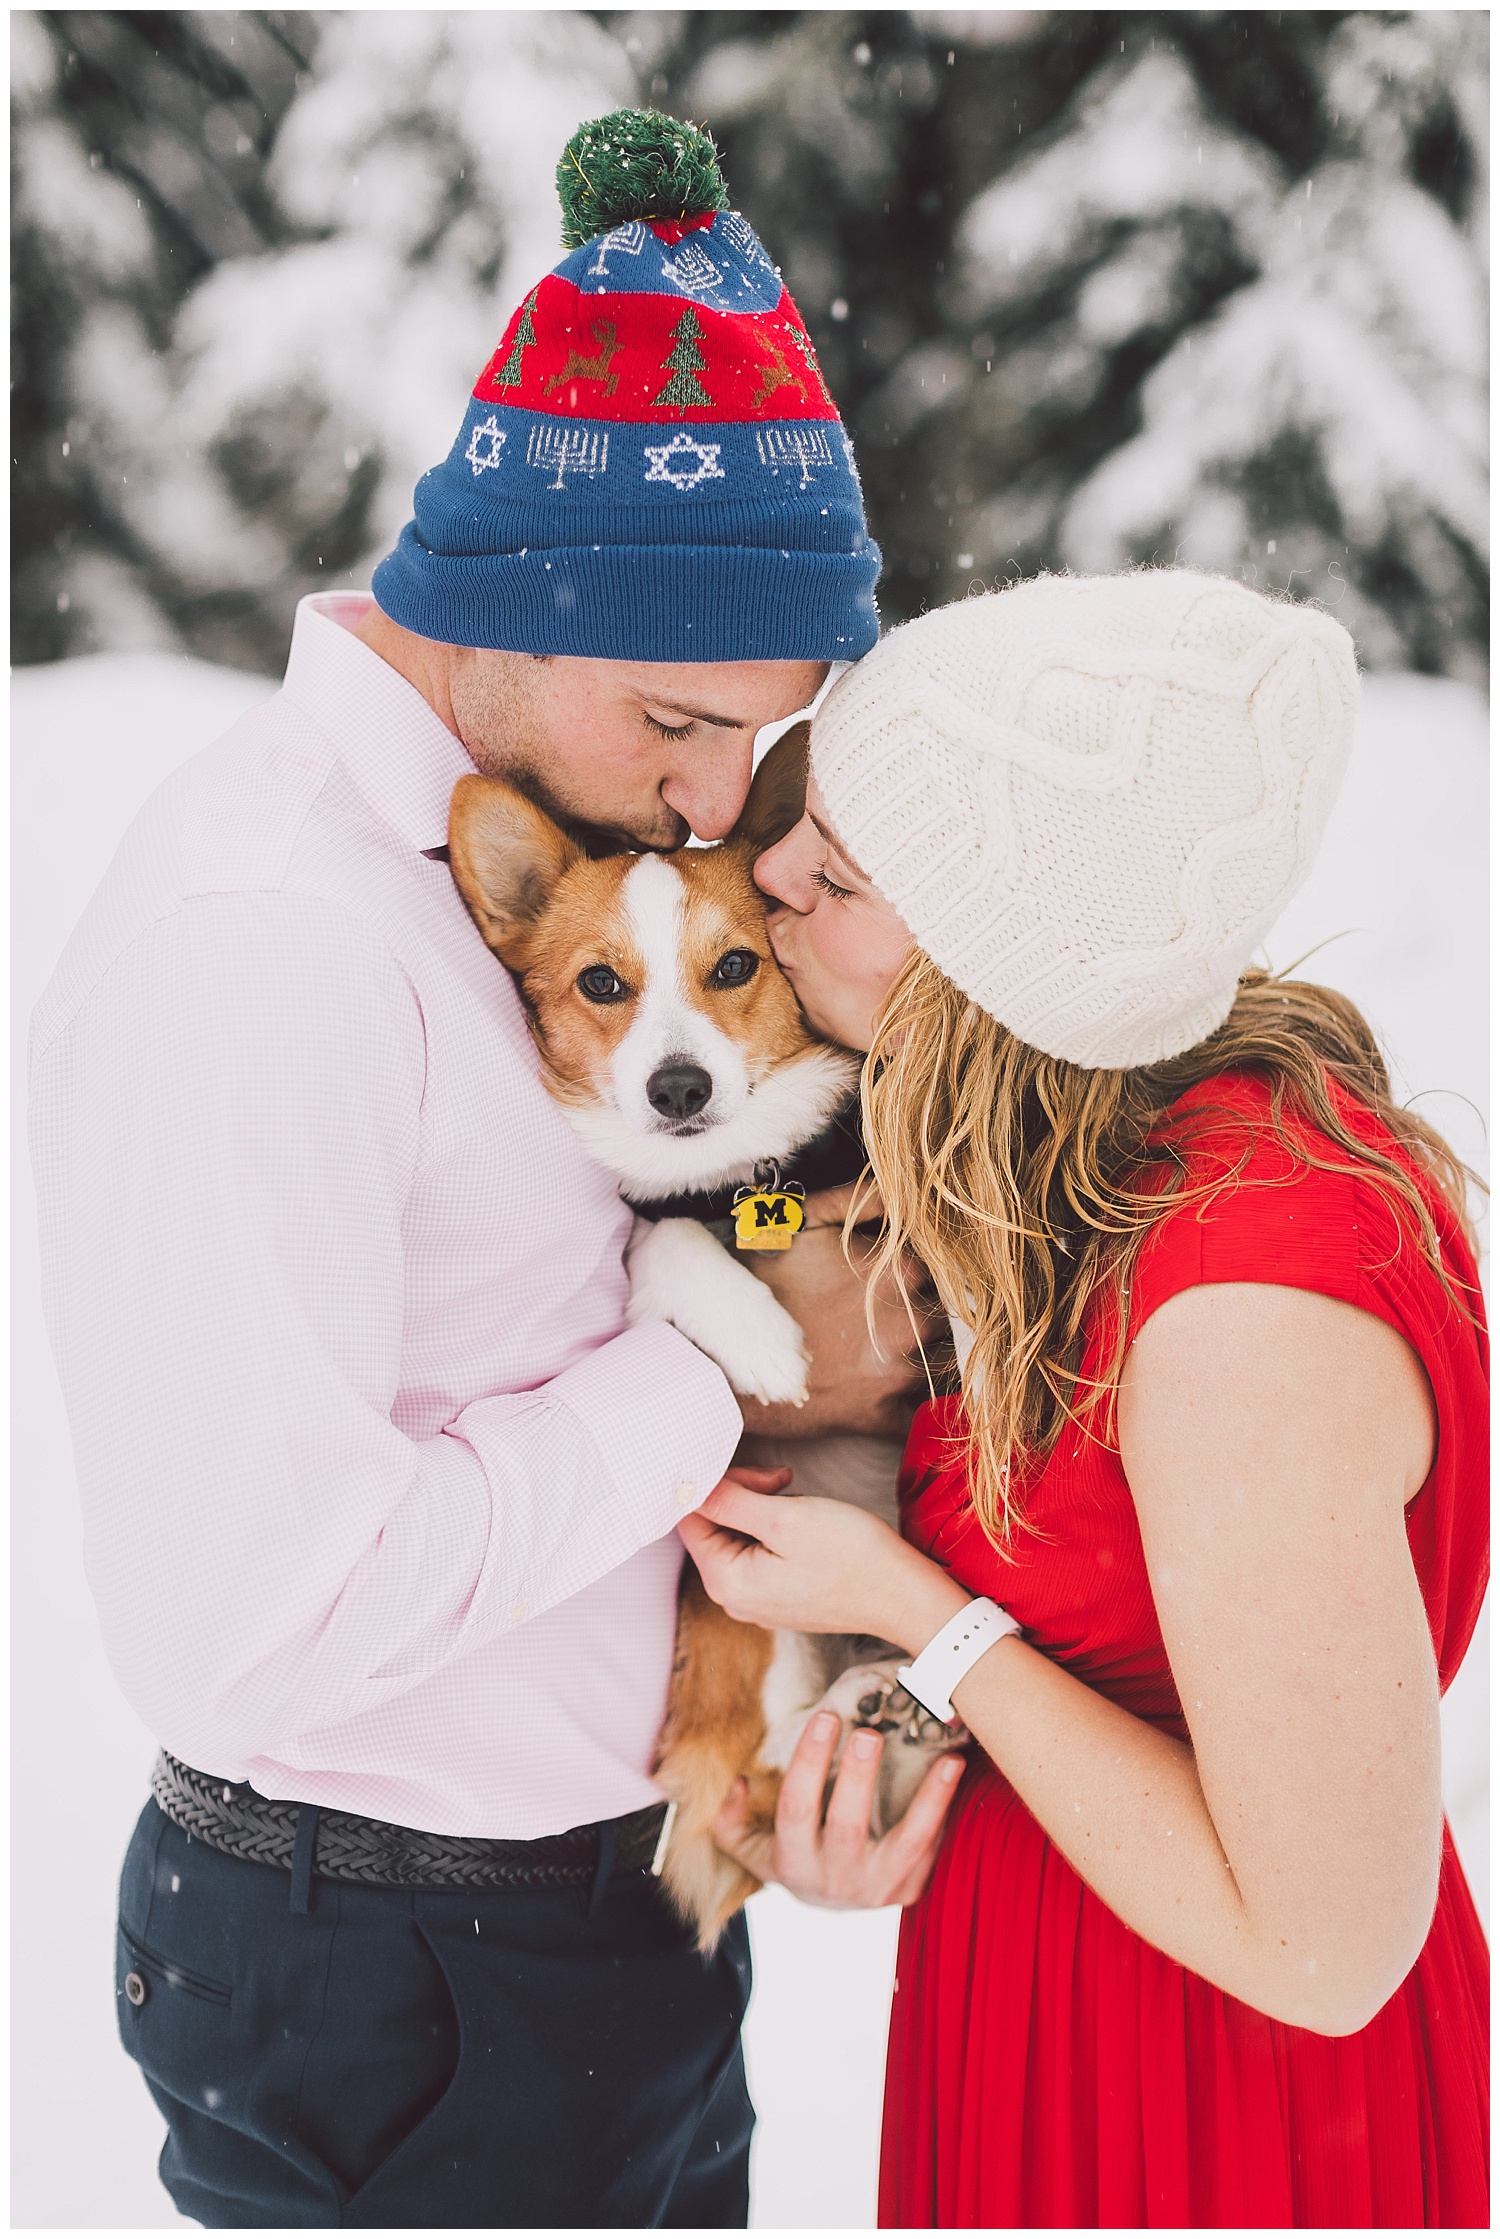 Snowy engagement session at Snoqualmie Pass by Luma Weddings